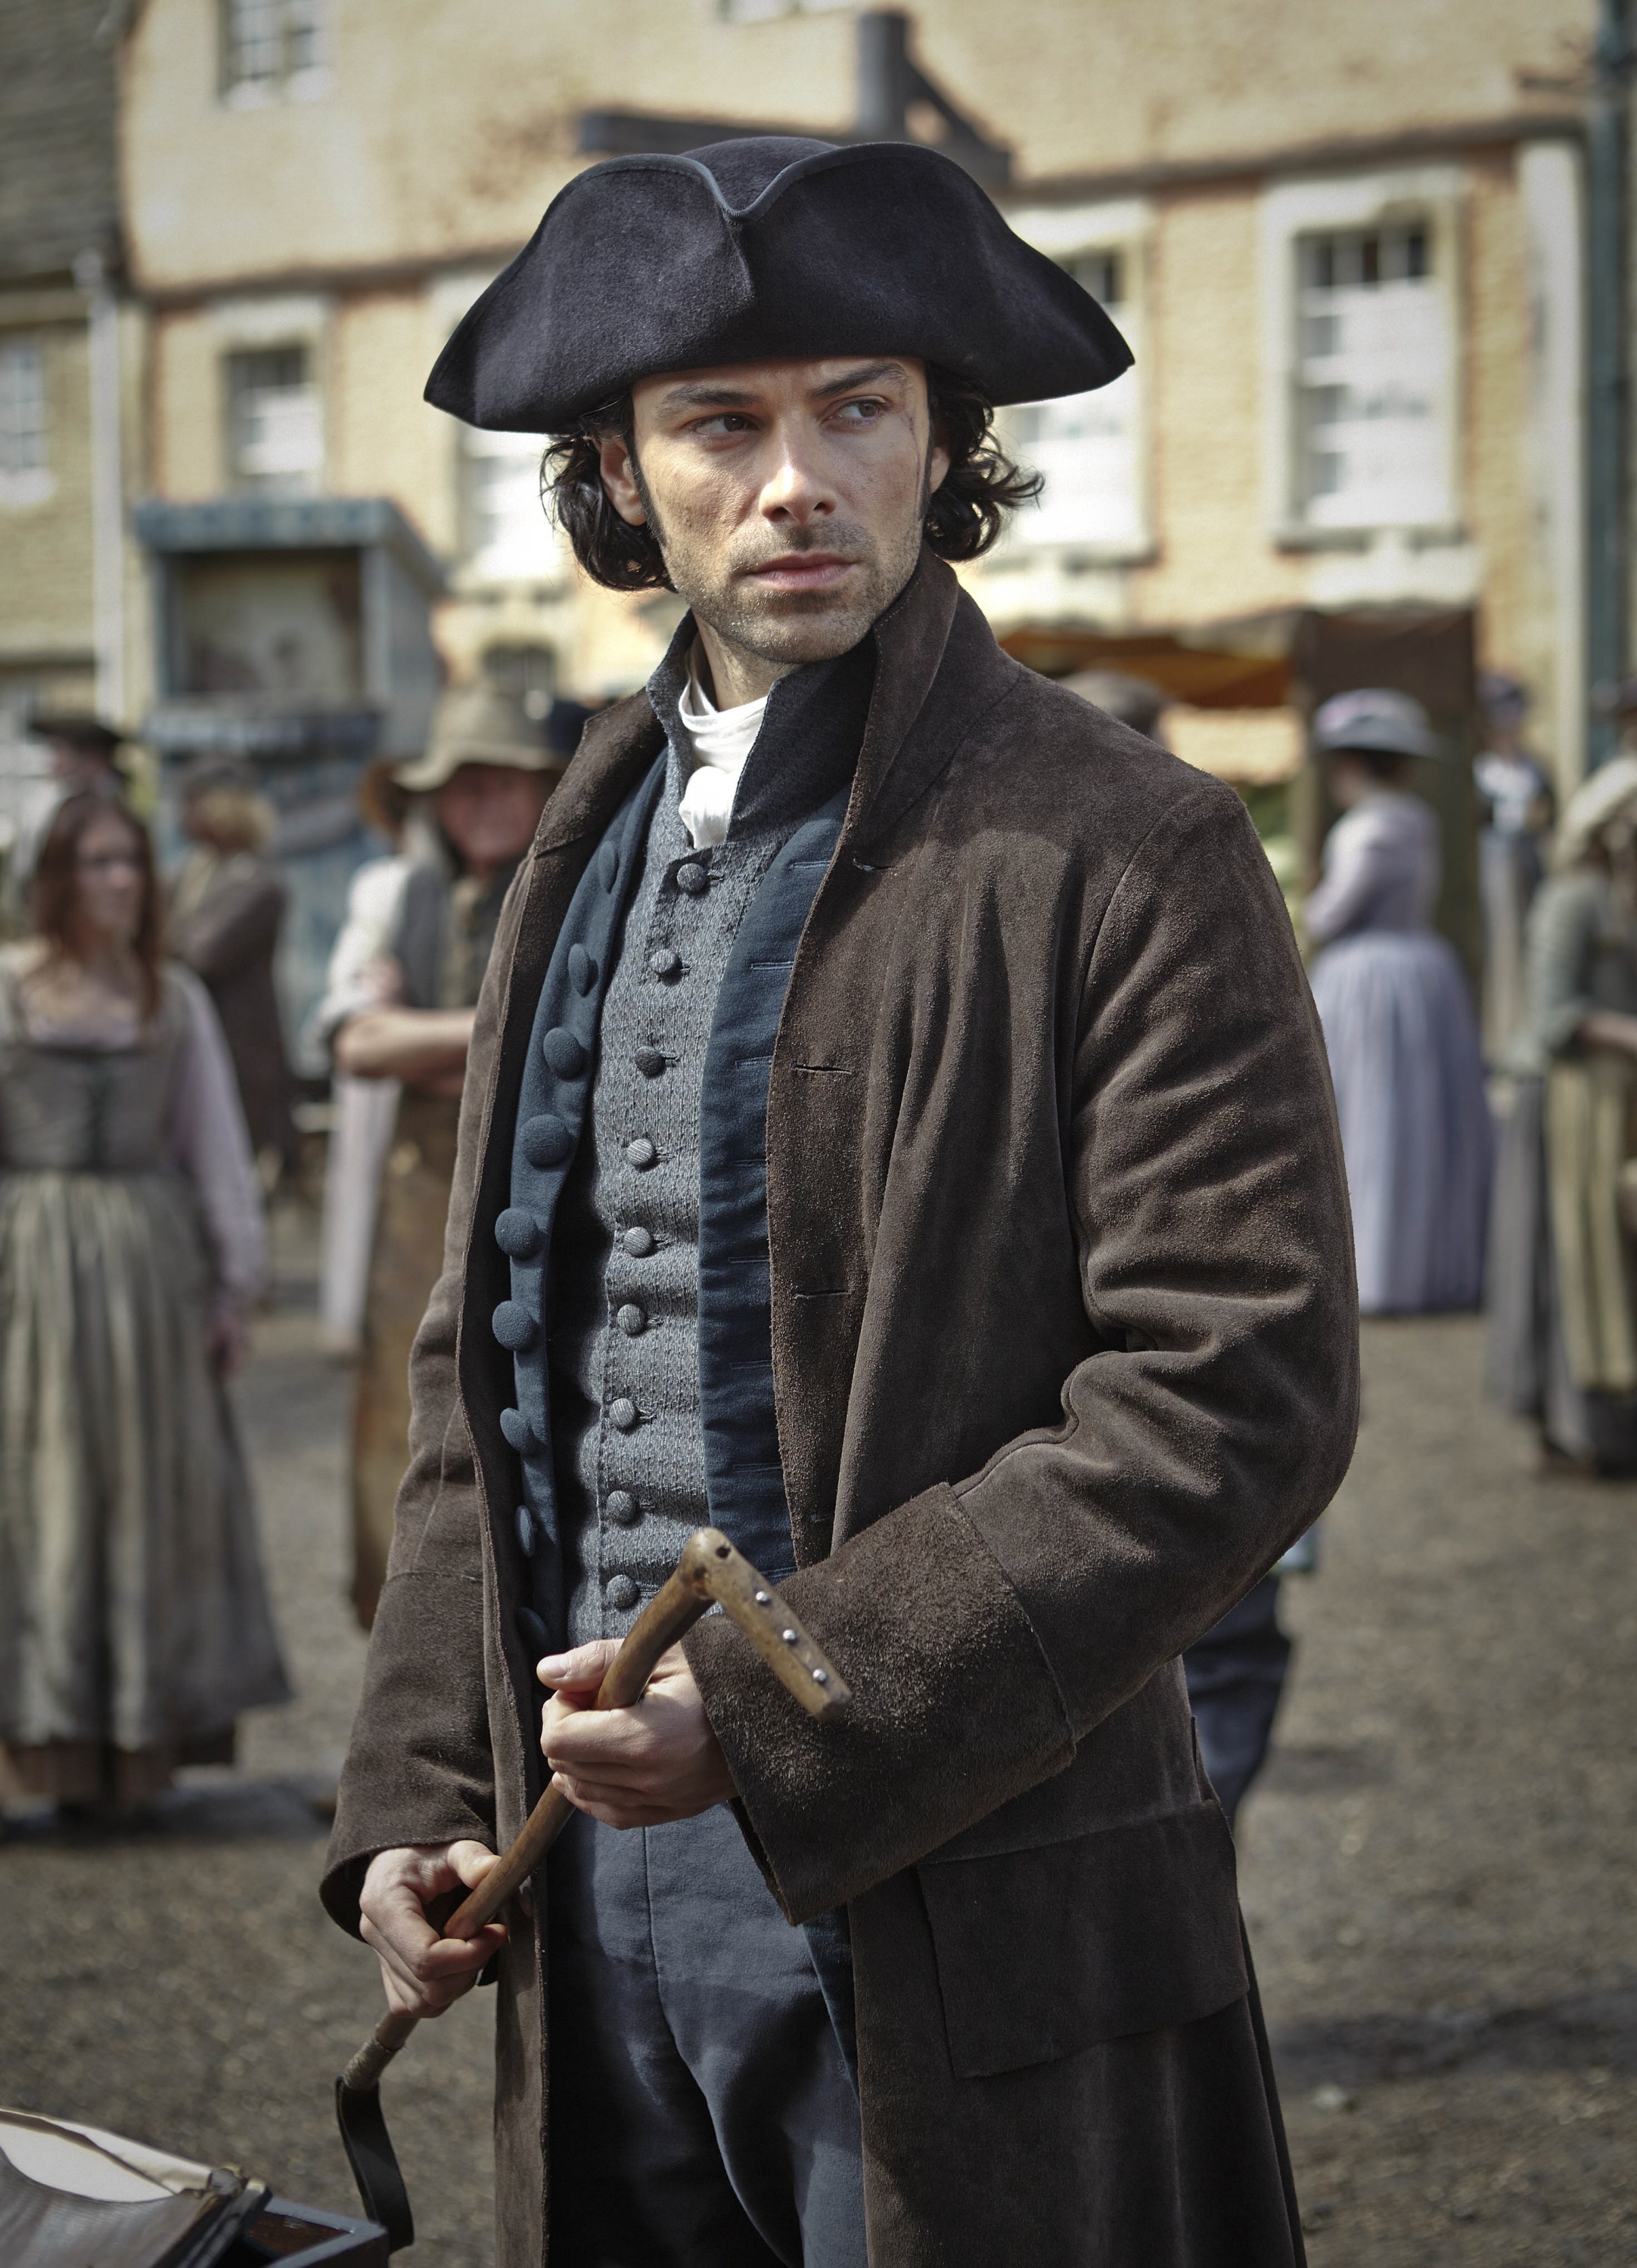 <p>The historical drama "Poldark" begins just after the American Revolutionary War and follows British Army captain Ross Poldark (played by Aidan Turner) as he returns home to his land and mines in Cornwall, England, to find his fiancée engaged to another man. As he builds a new life, he also finds a new love and, unfortunately, new battles to fight and fresh heartbreak to endure. The fifth and final season aired on PBS in 2019.</p>